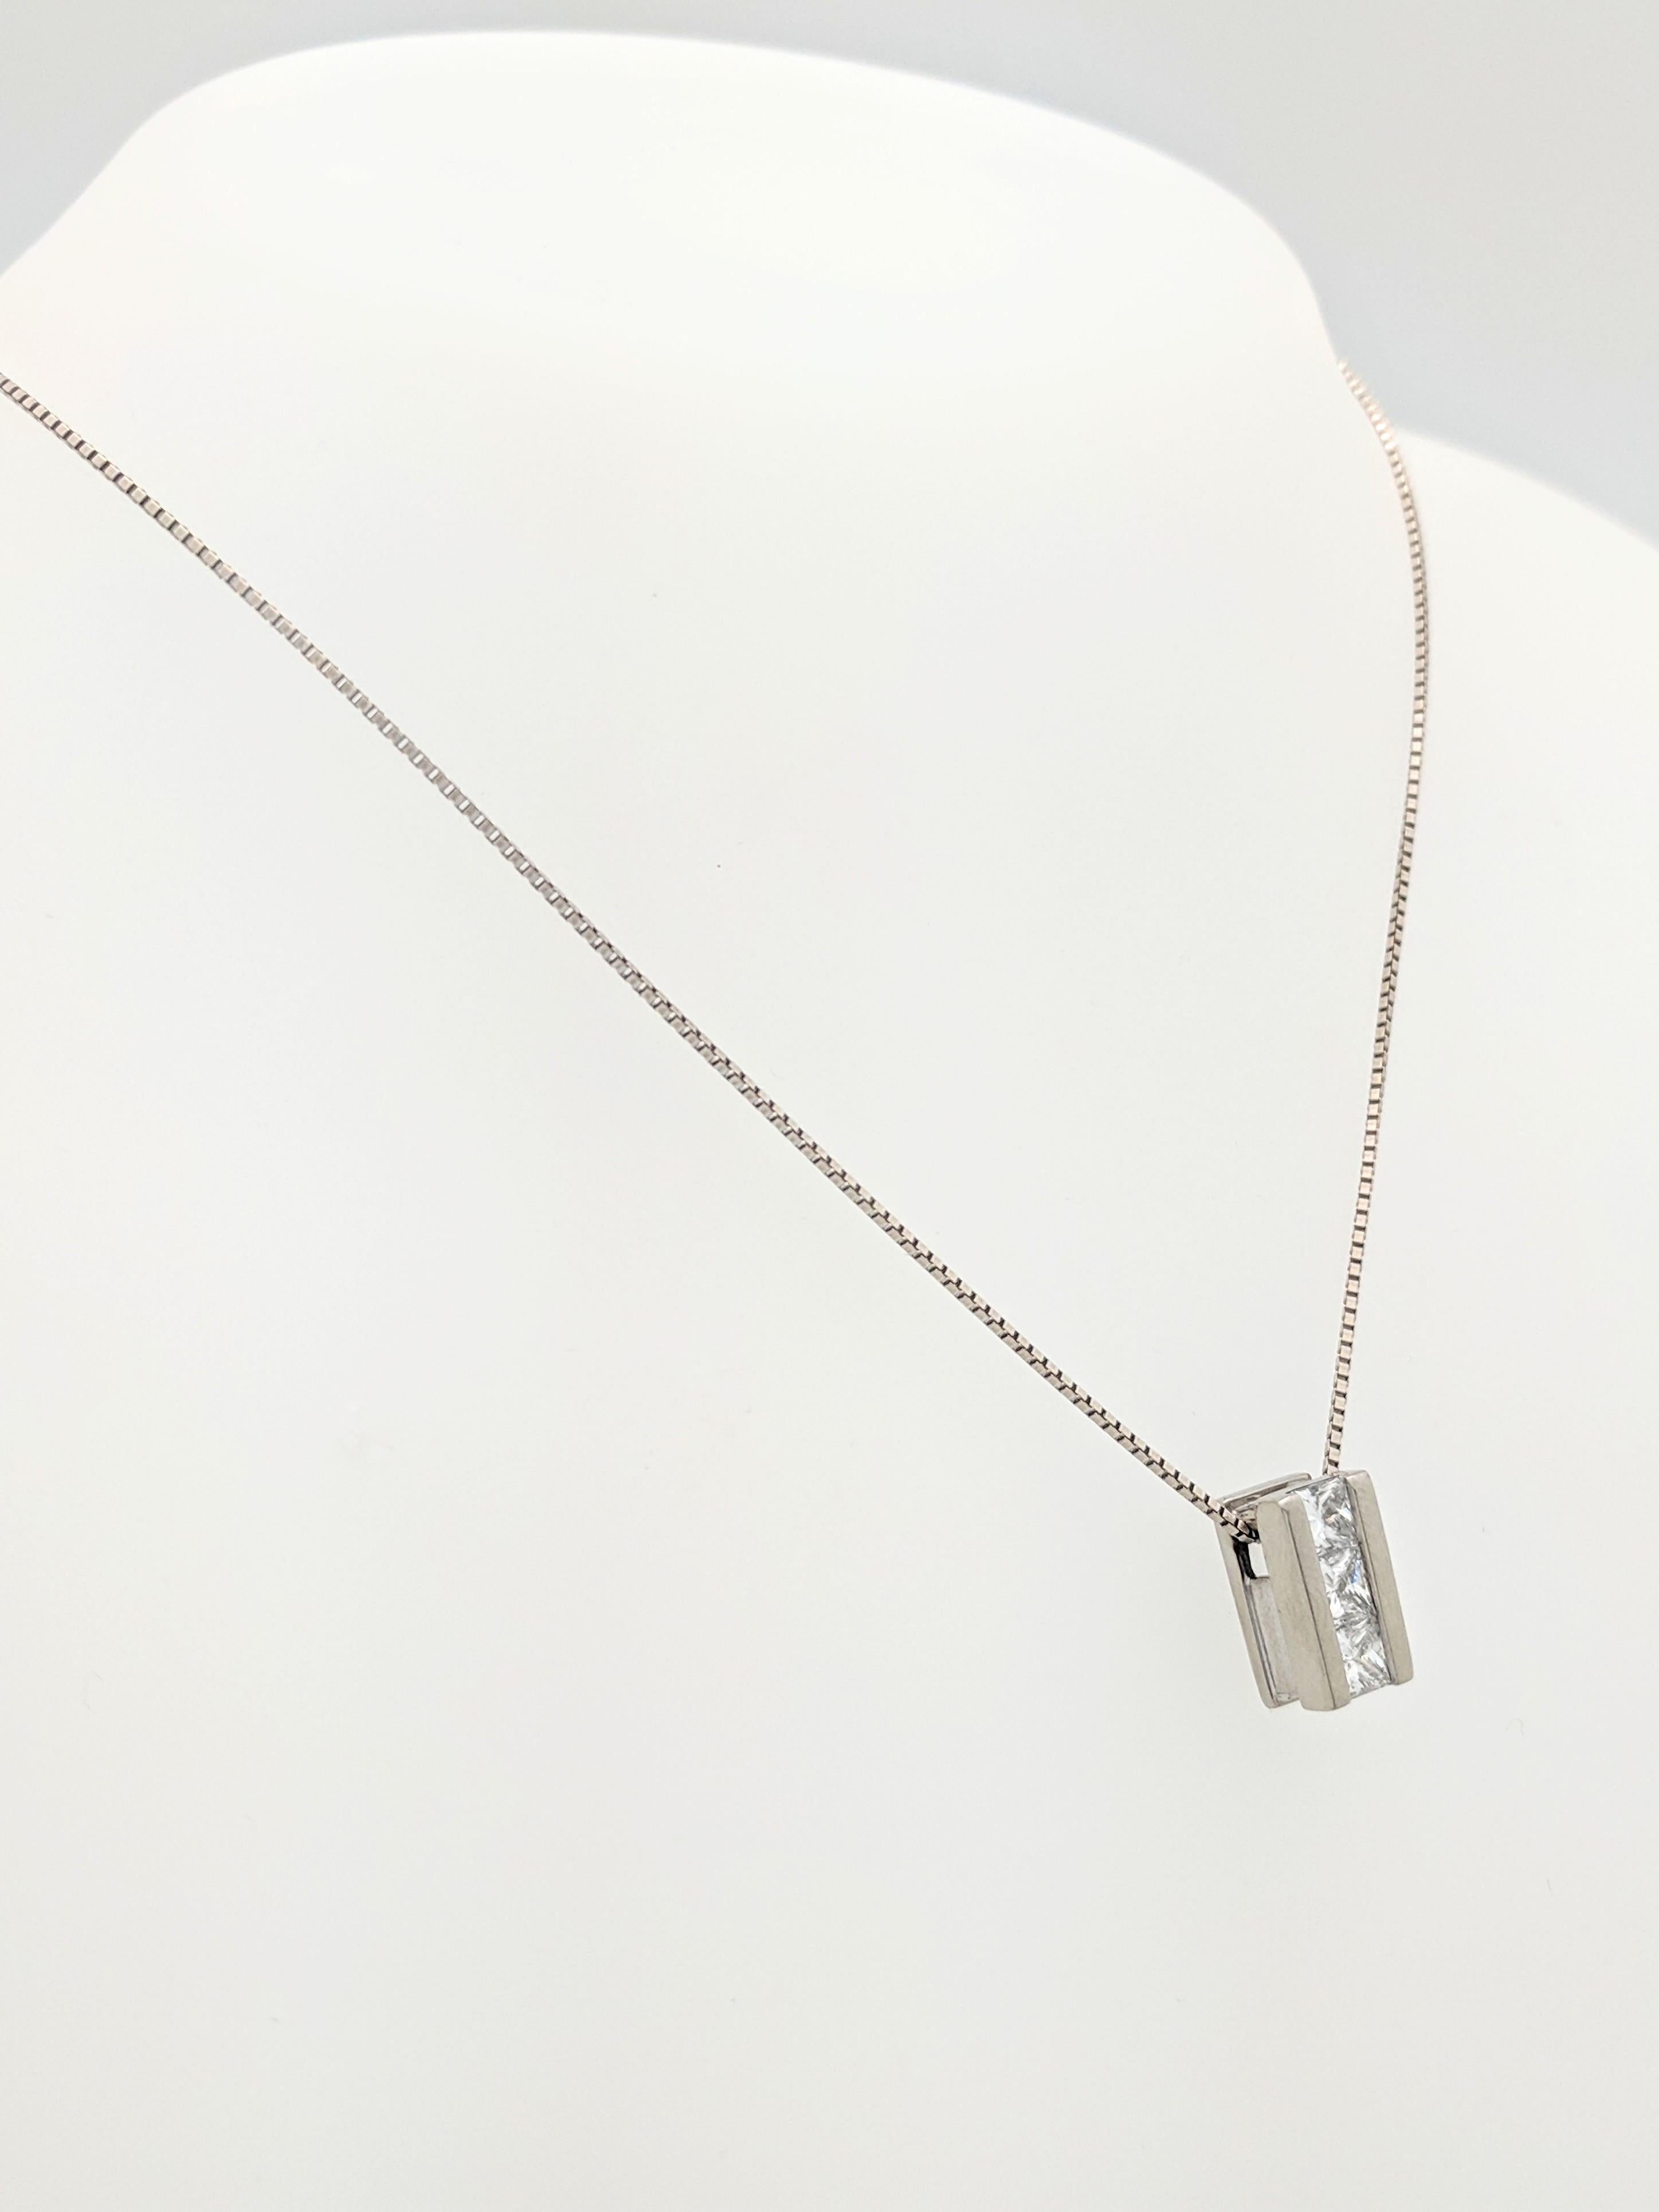 14K White Gold 1ctw Princess Cut Diamond Pendant Necklace

You are viewing a beautiful diamond pendant necklace.

This necklace is crafted from 14k white gold and weighs 5.8 grams. It features (3) .33ct princess cut diamonds for an estimated 1ctw.